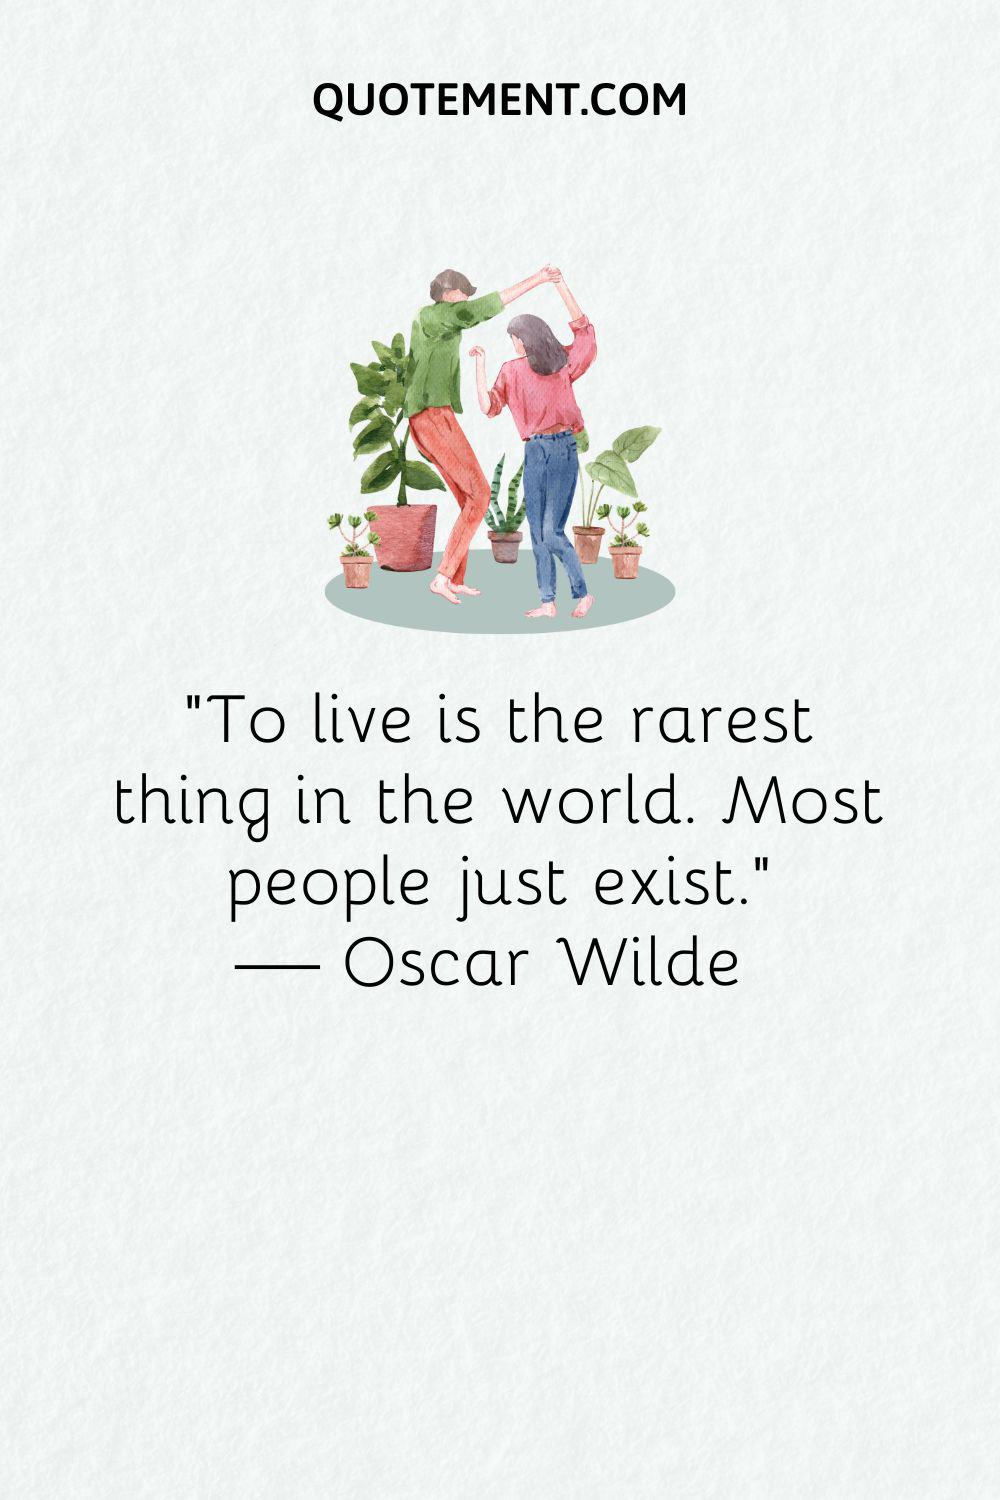 “To live is the rarest thing in the world. Most people just exist.” — Oscar Wilde